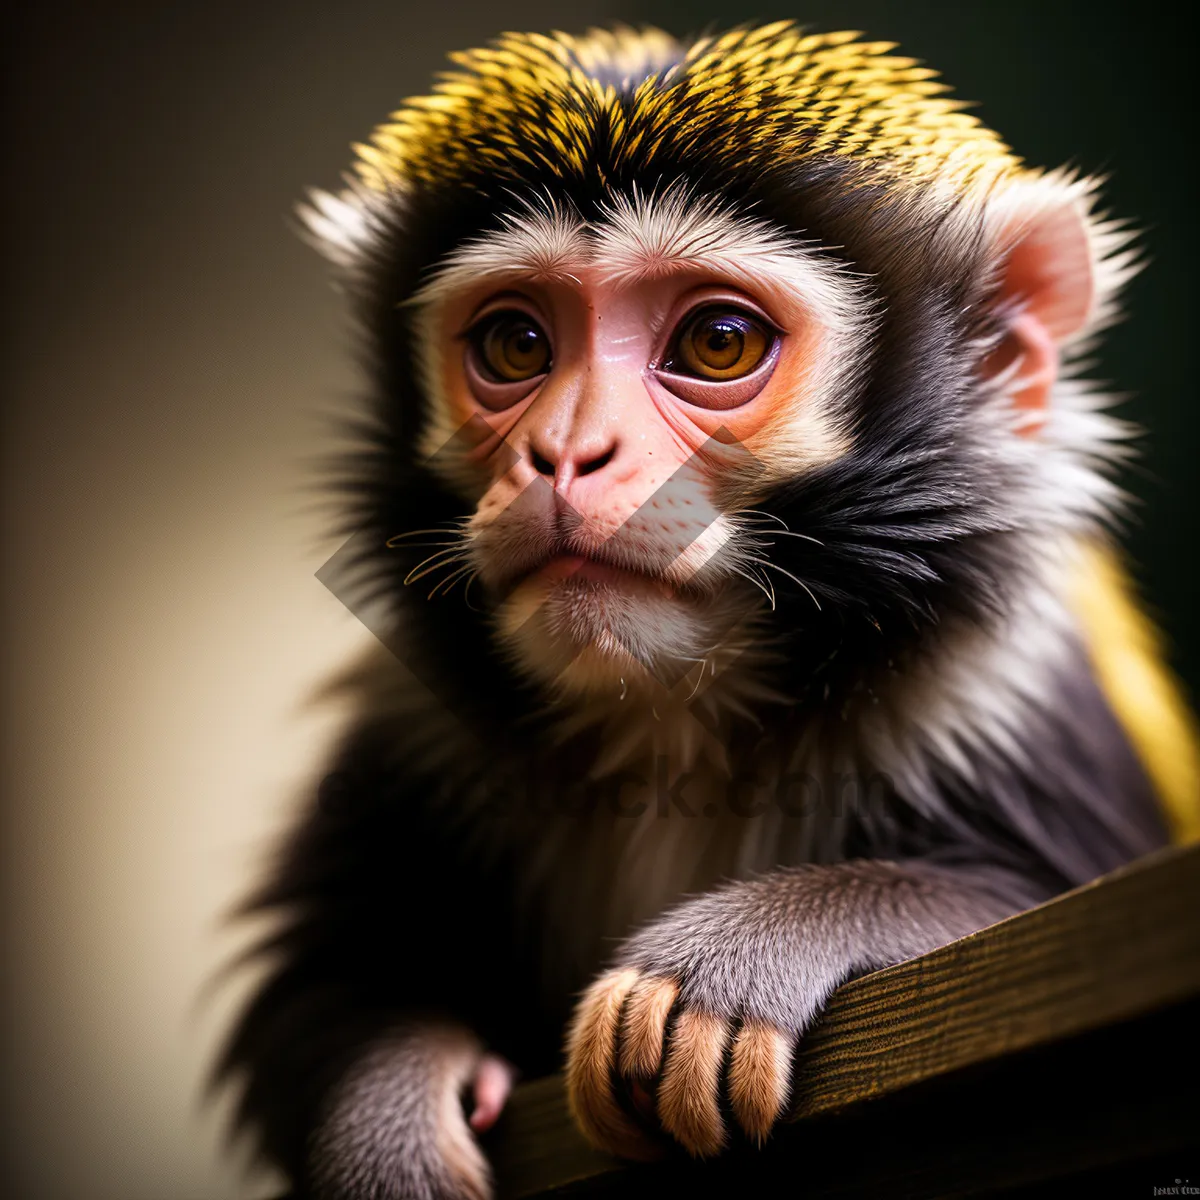 Picture of Wild Macaque Monkey in Zoo